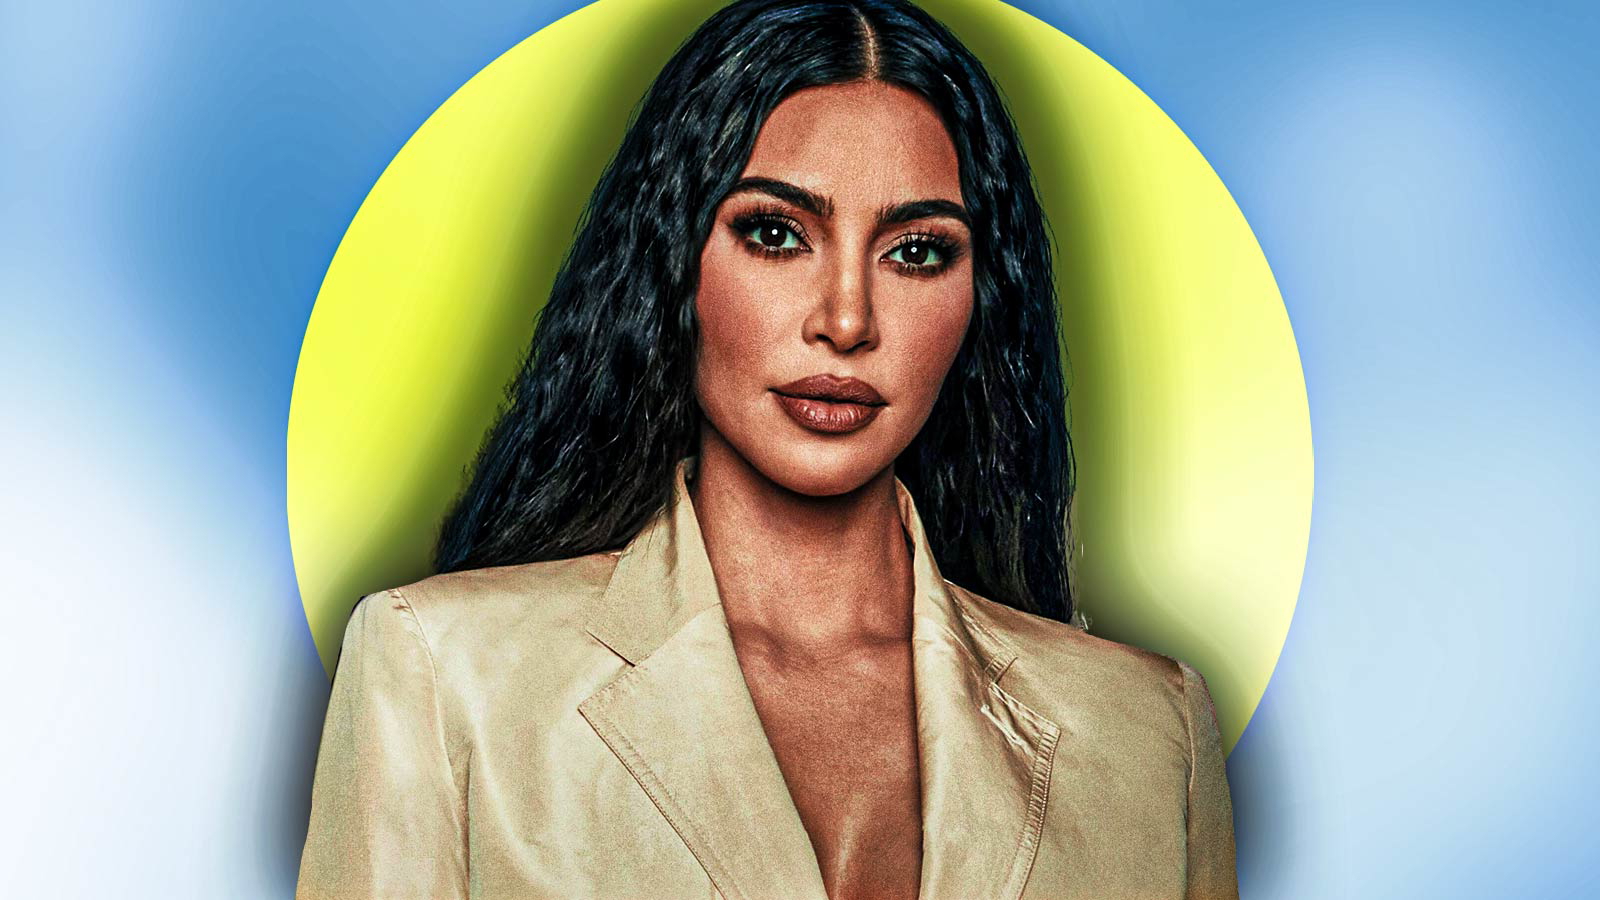 “Law school was just Kim method acting”: Kim Kardashian Shuts Down Haters Who Said She’s Talentless With a Big Achievement That’ll Make Biggest Actors Jealous